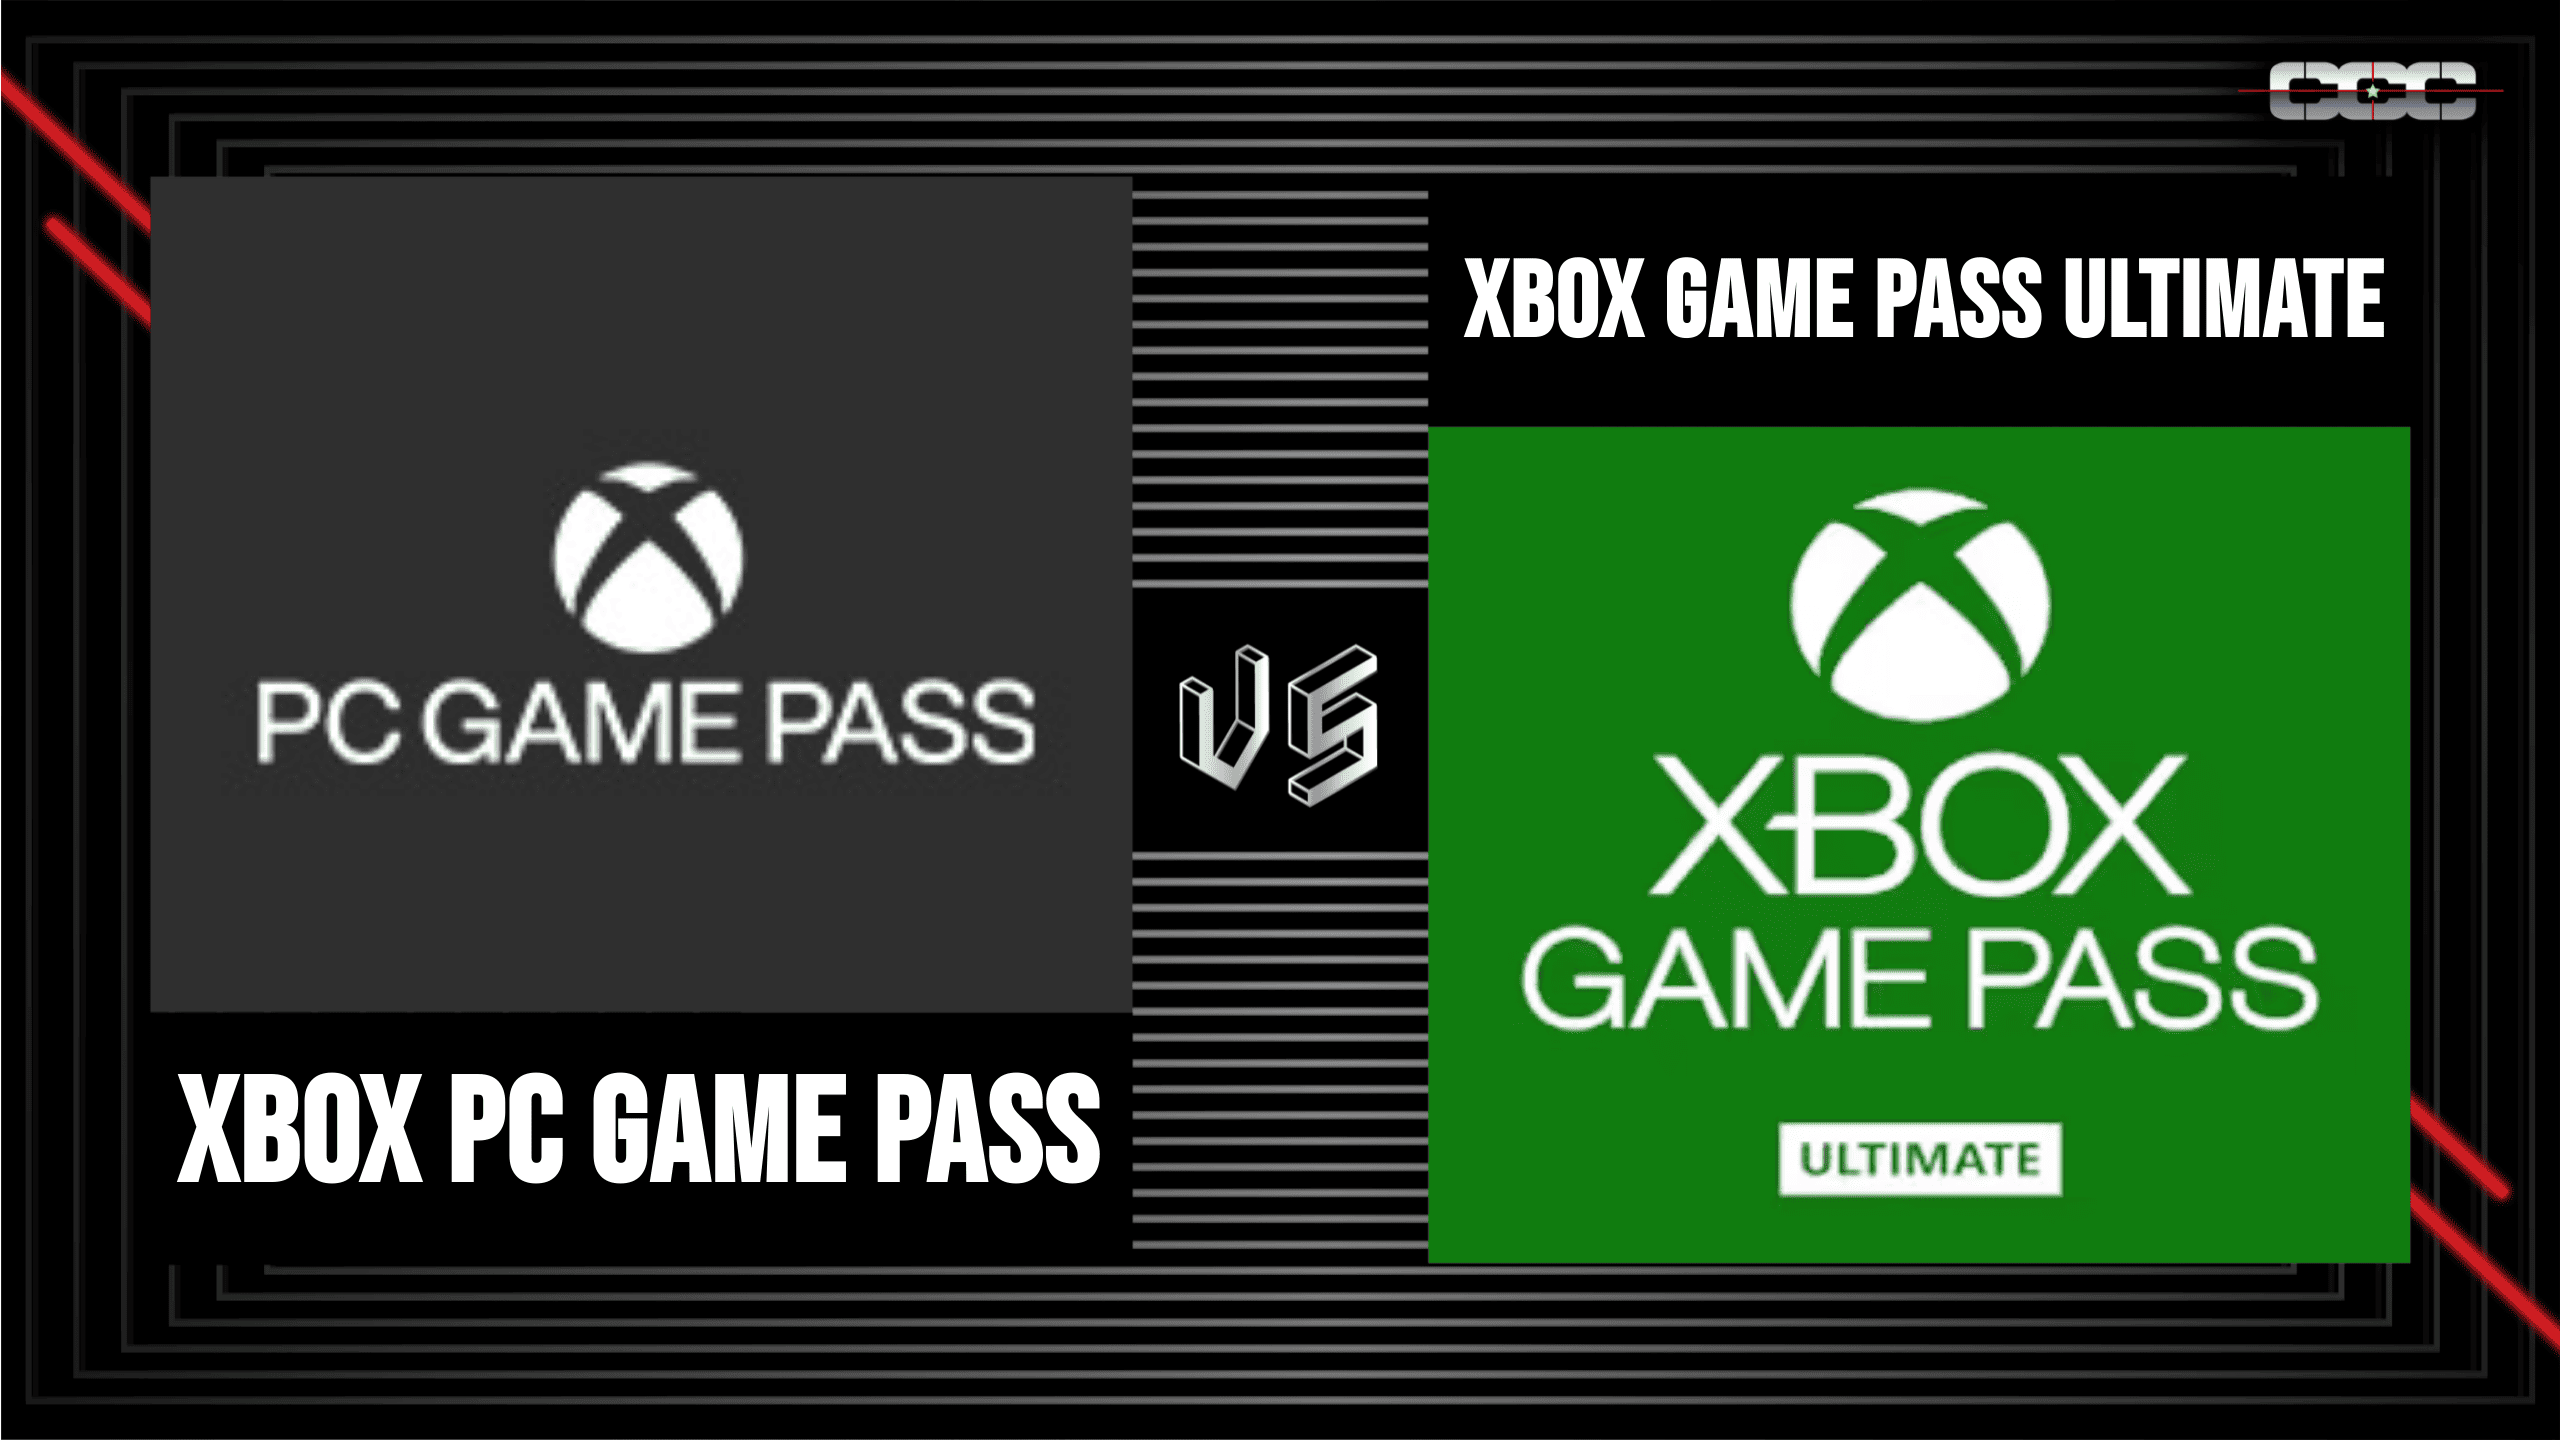 Xbox PC Game Pass vs Xbox Game Pass Ultimate